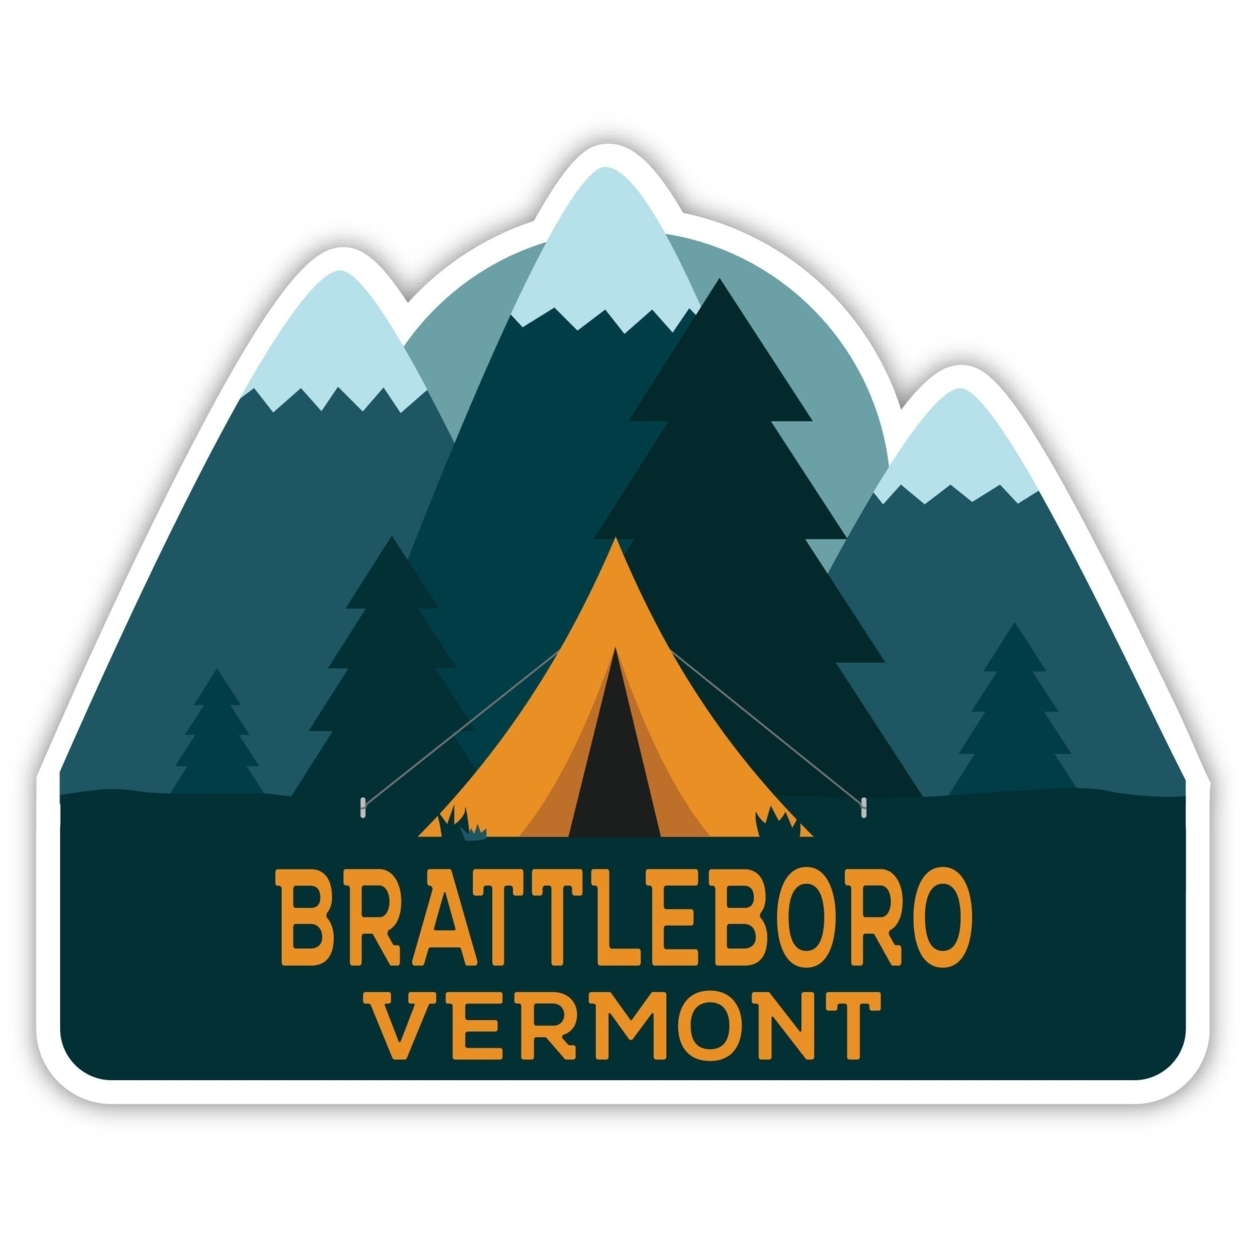 Brattleboro Vermont Souvenir Decorative Stickers (Choose Theme And Size) - 4-Pack, 10-Inch, Great Outdoors